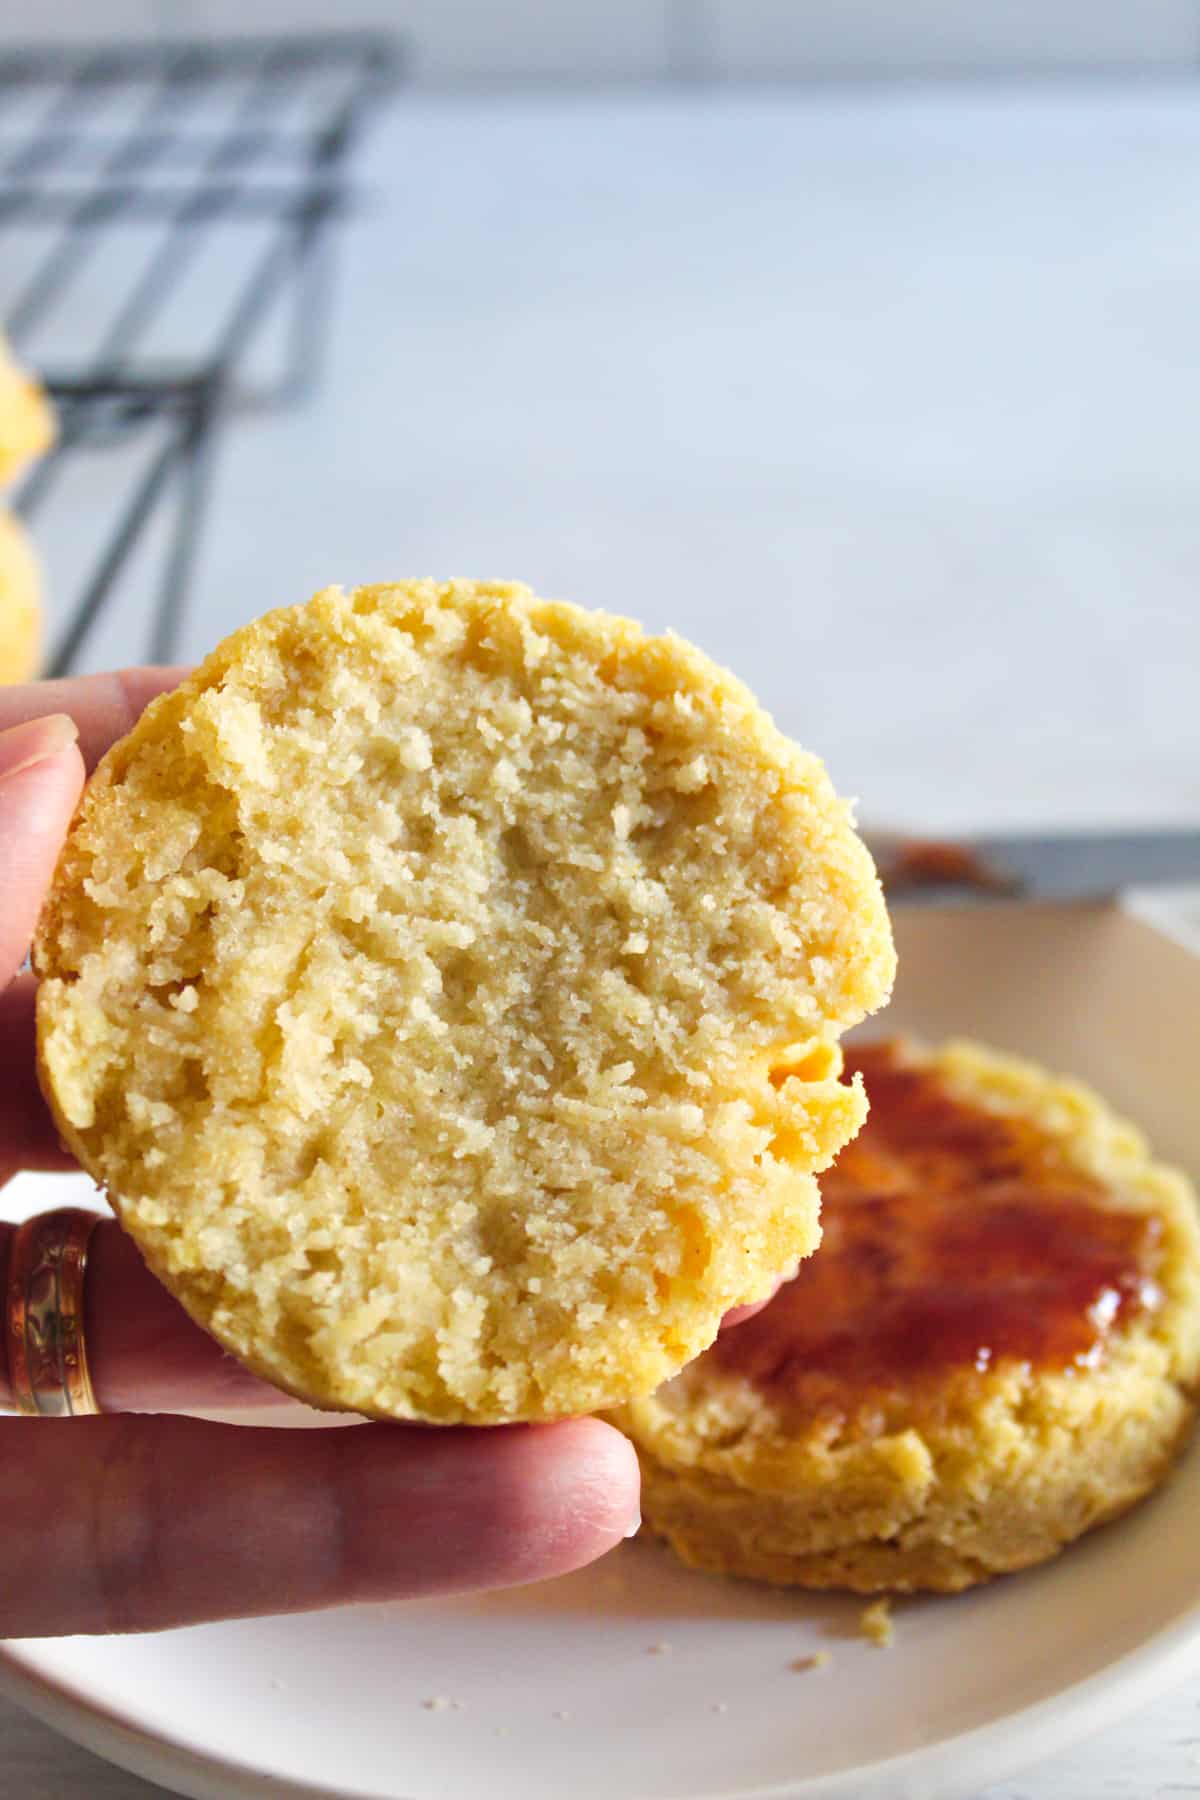 showing the inside of a biscuit.